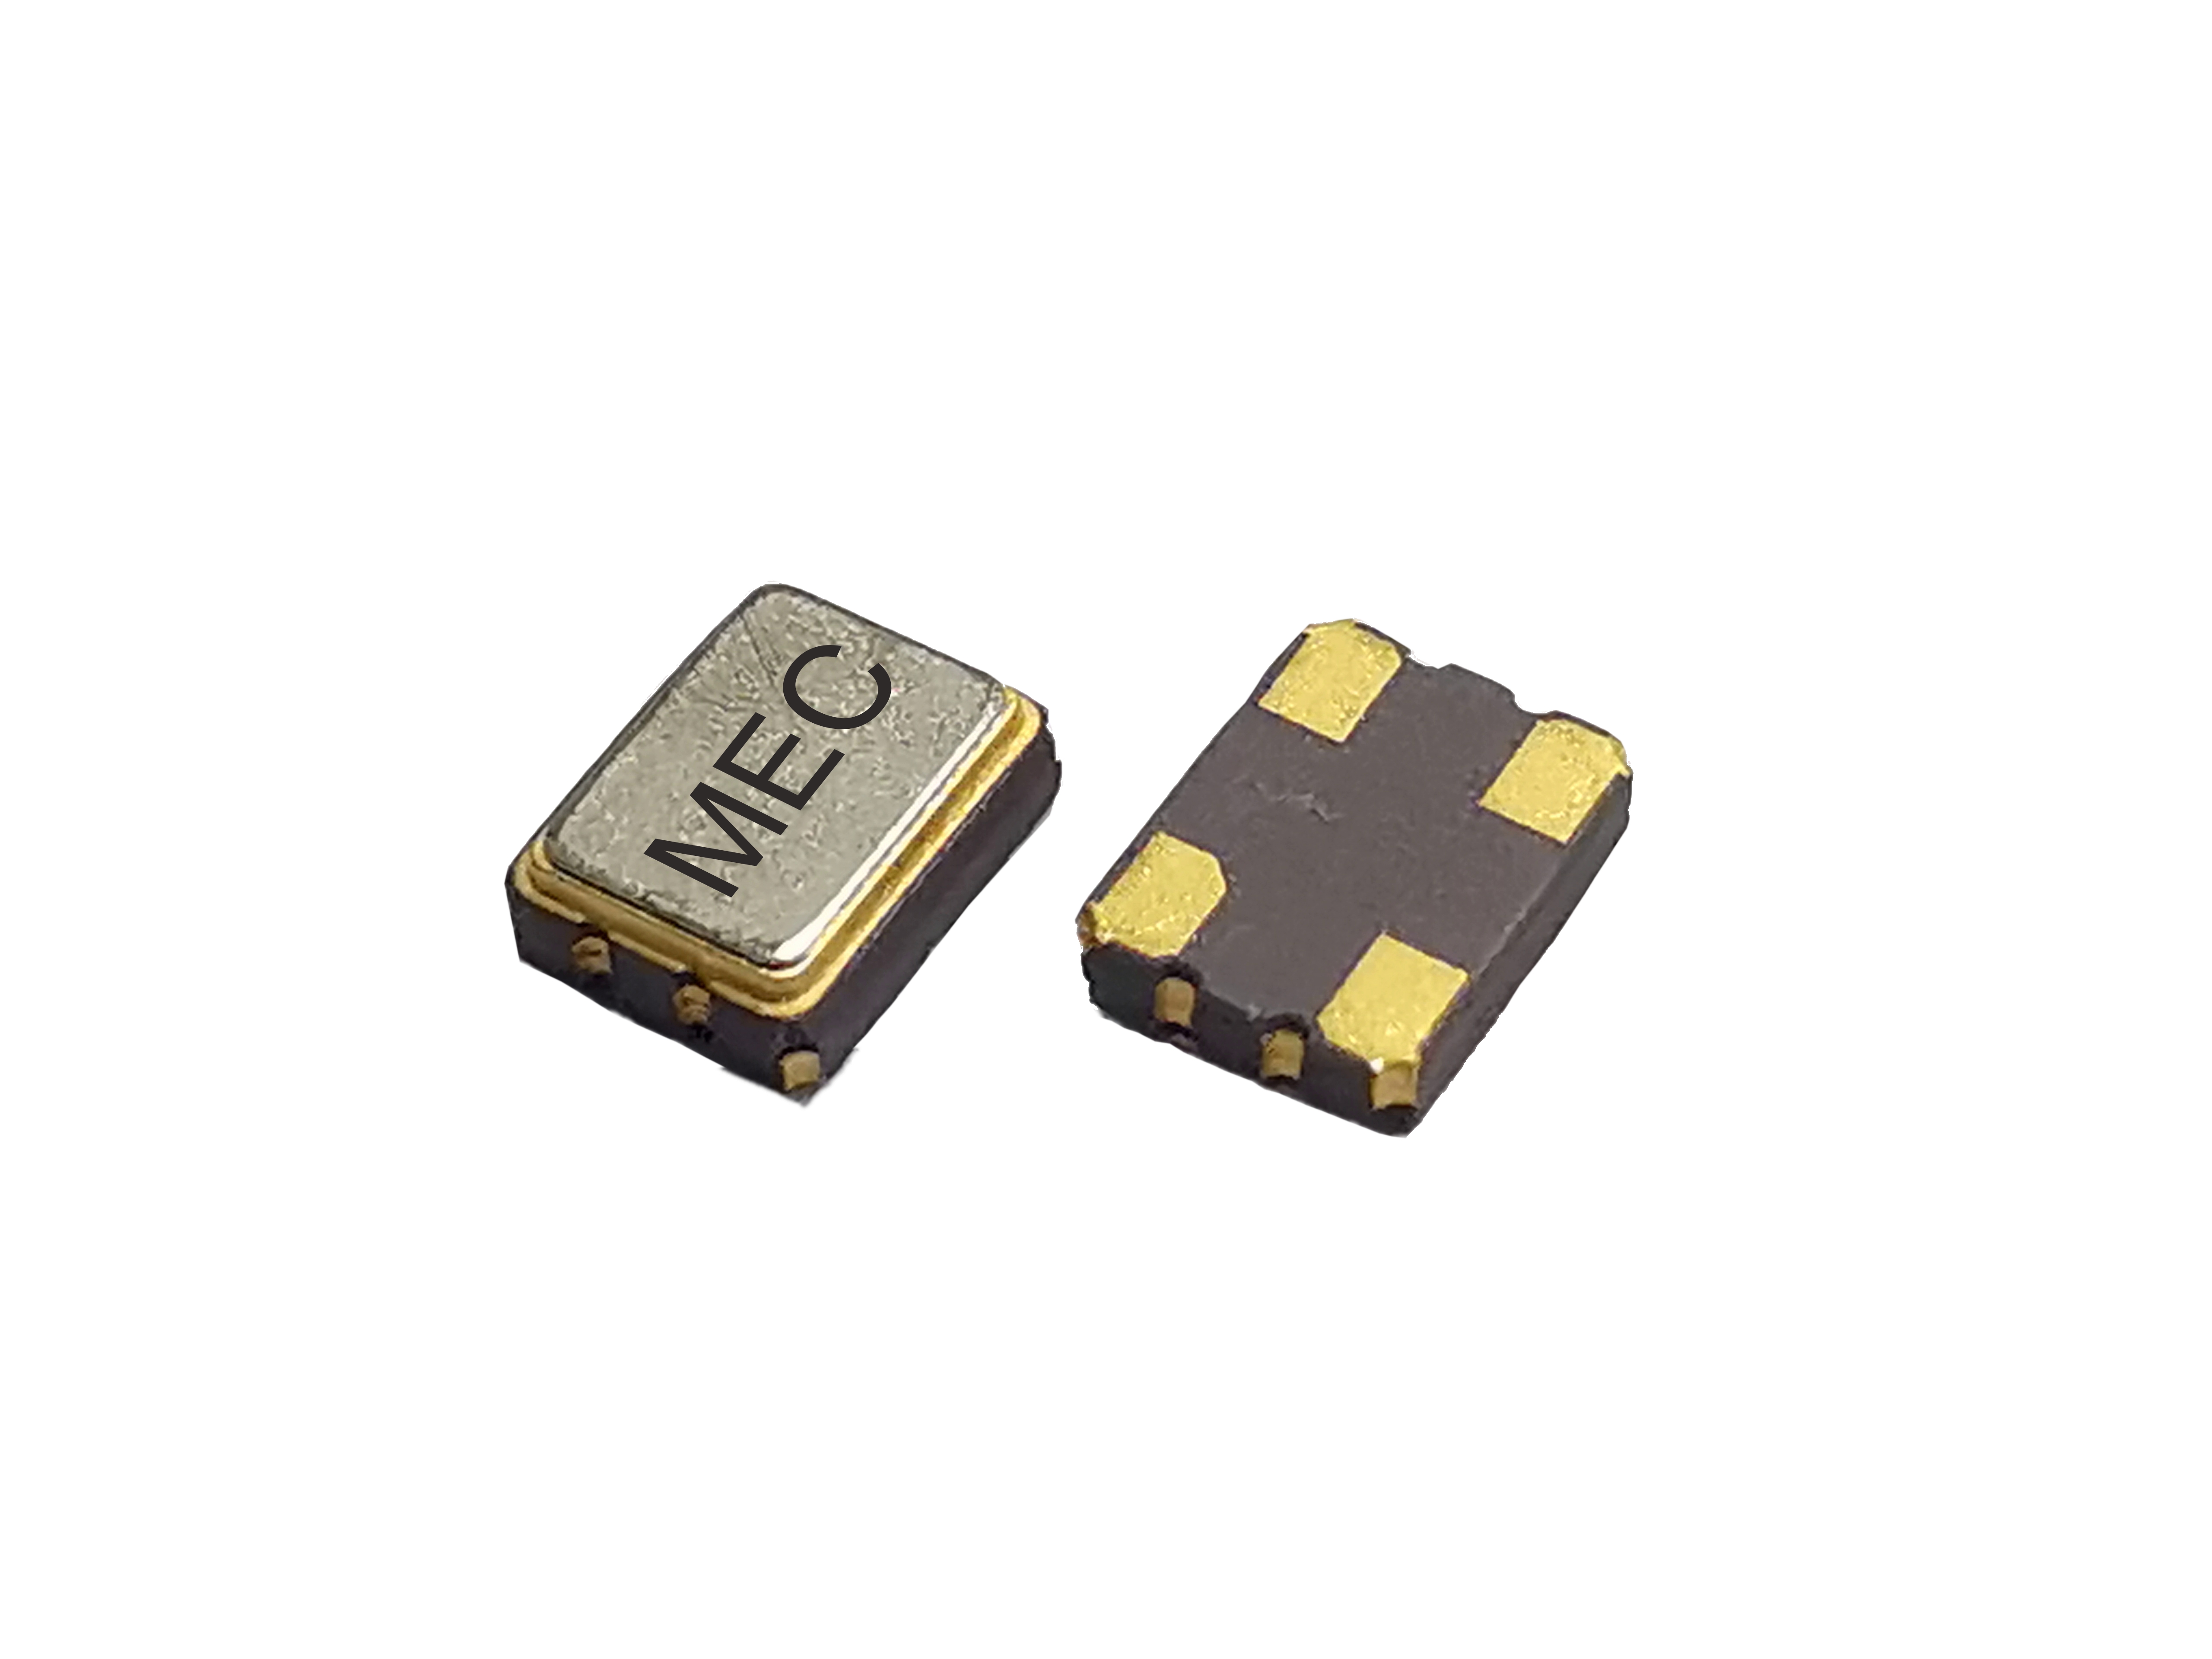 HC32 3225 1.8V Frequency Swithable CMOS SMD Crystal Oscillator